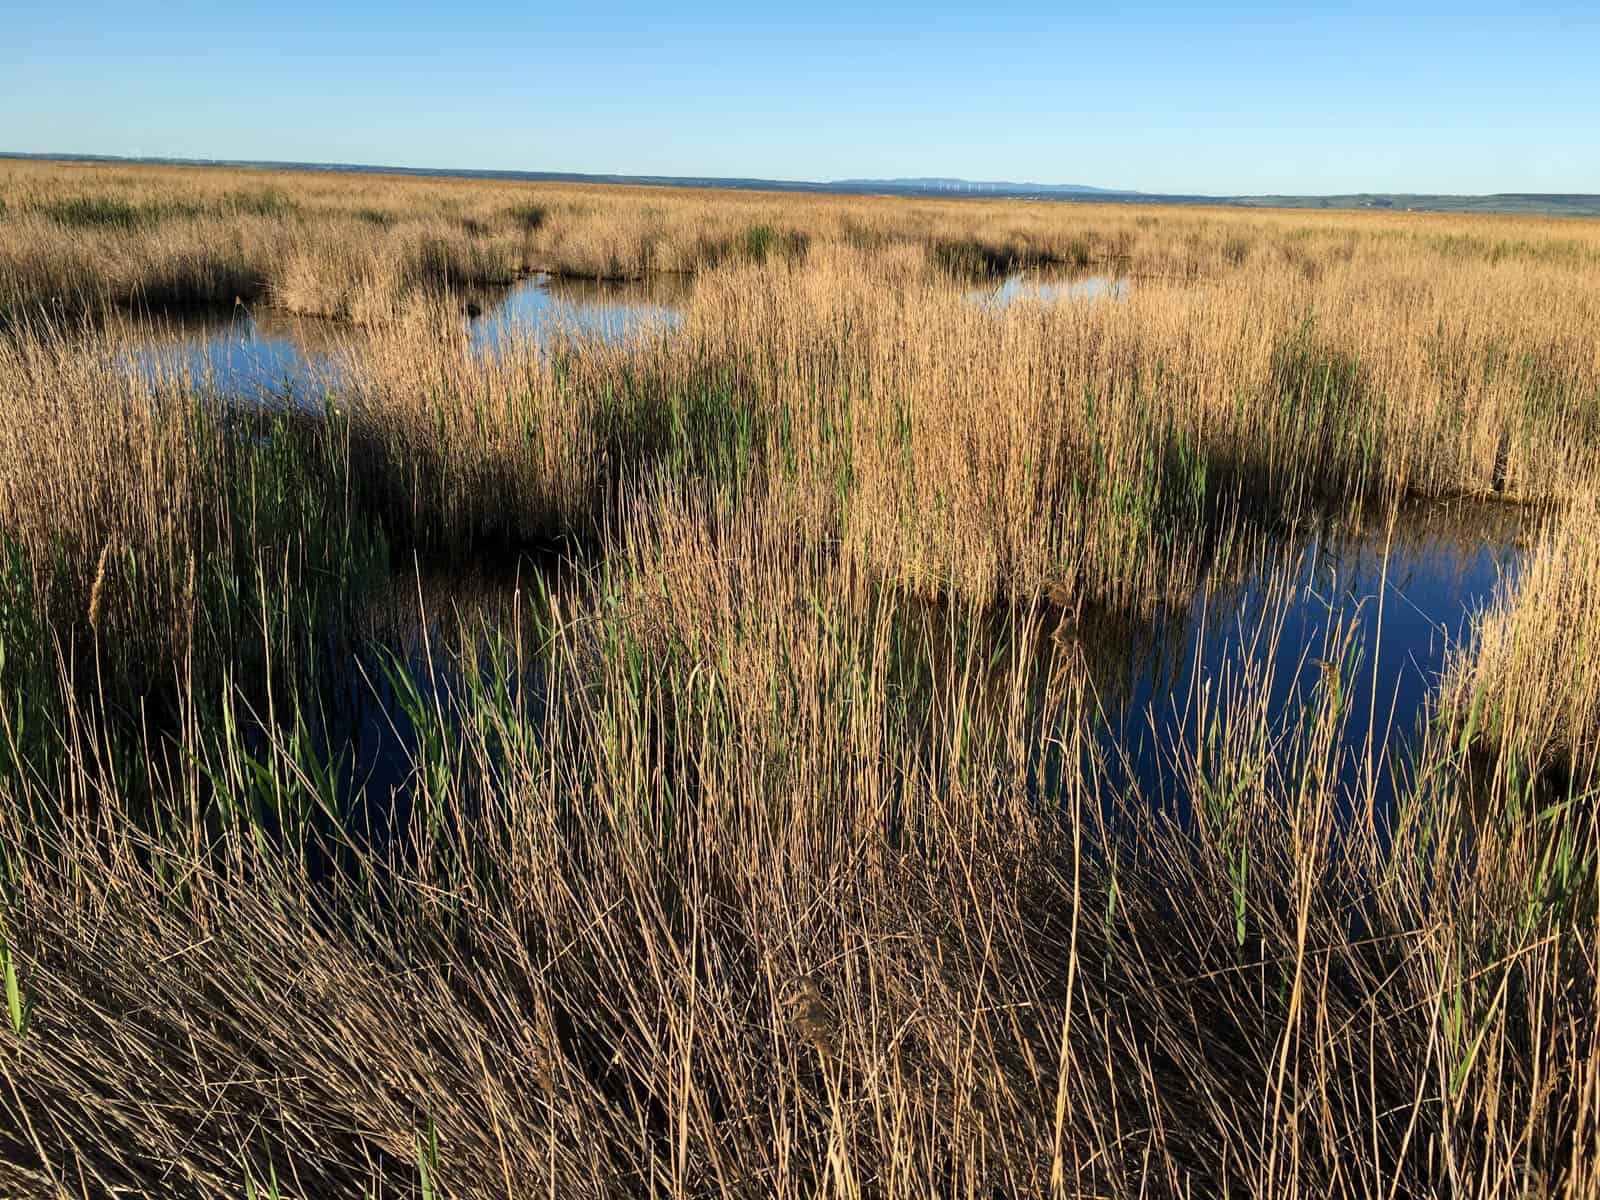 A new wetlands National Park in Slovakia?